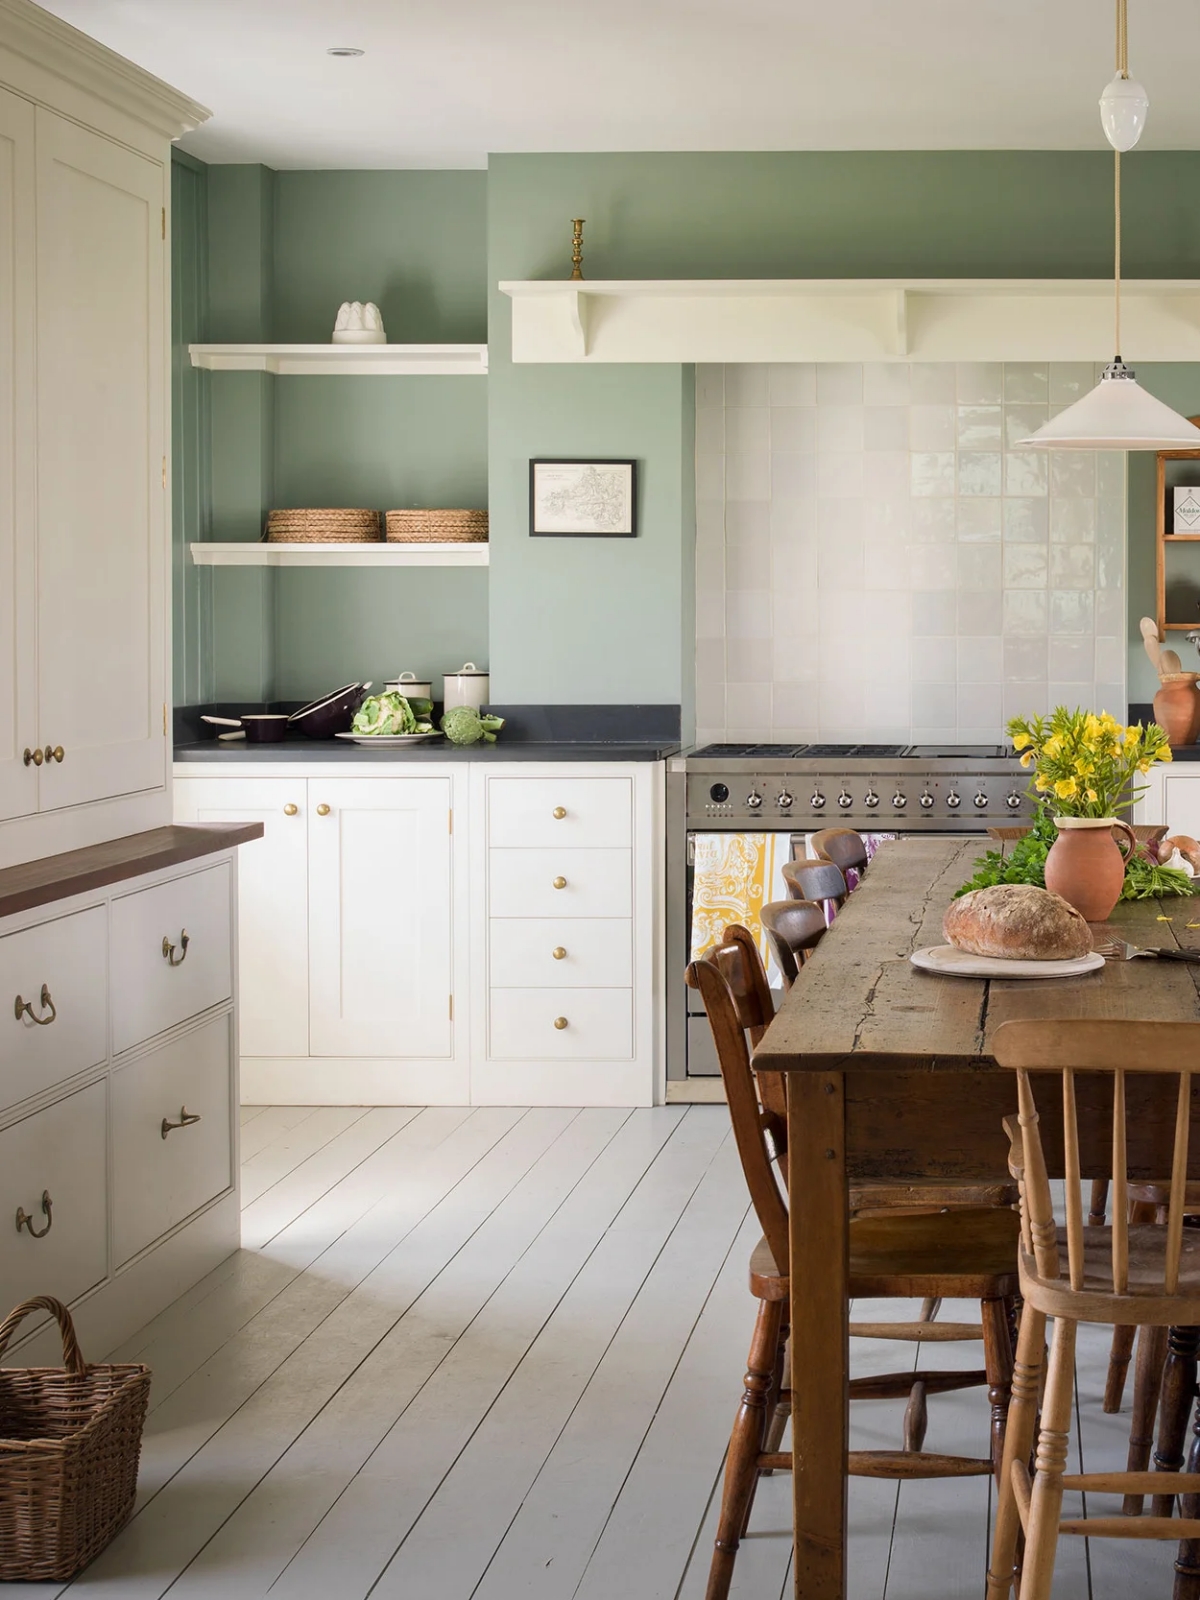 Cream Kitchen Cabinets: A Perfect Choice for a Timeless Kitchen